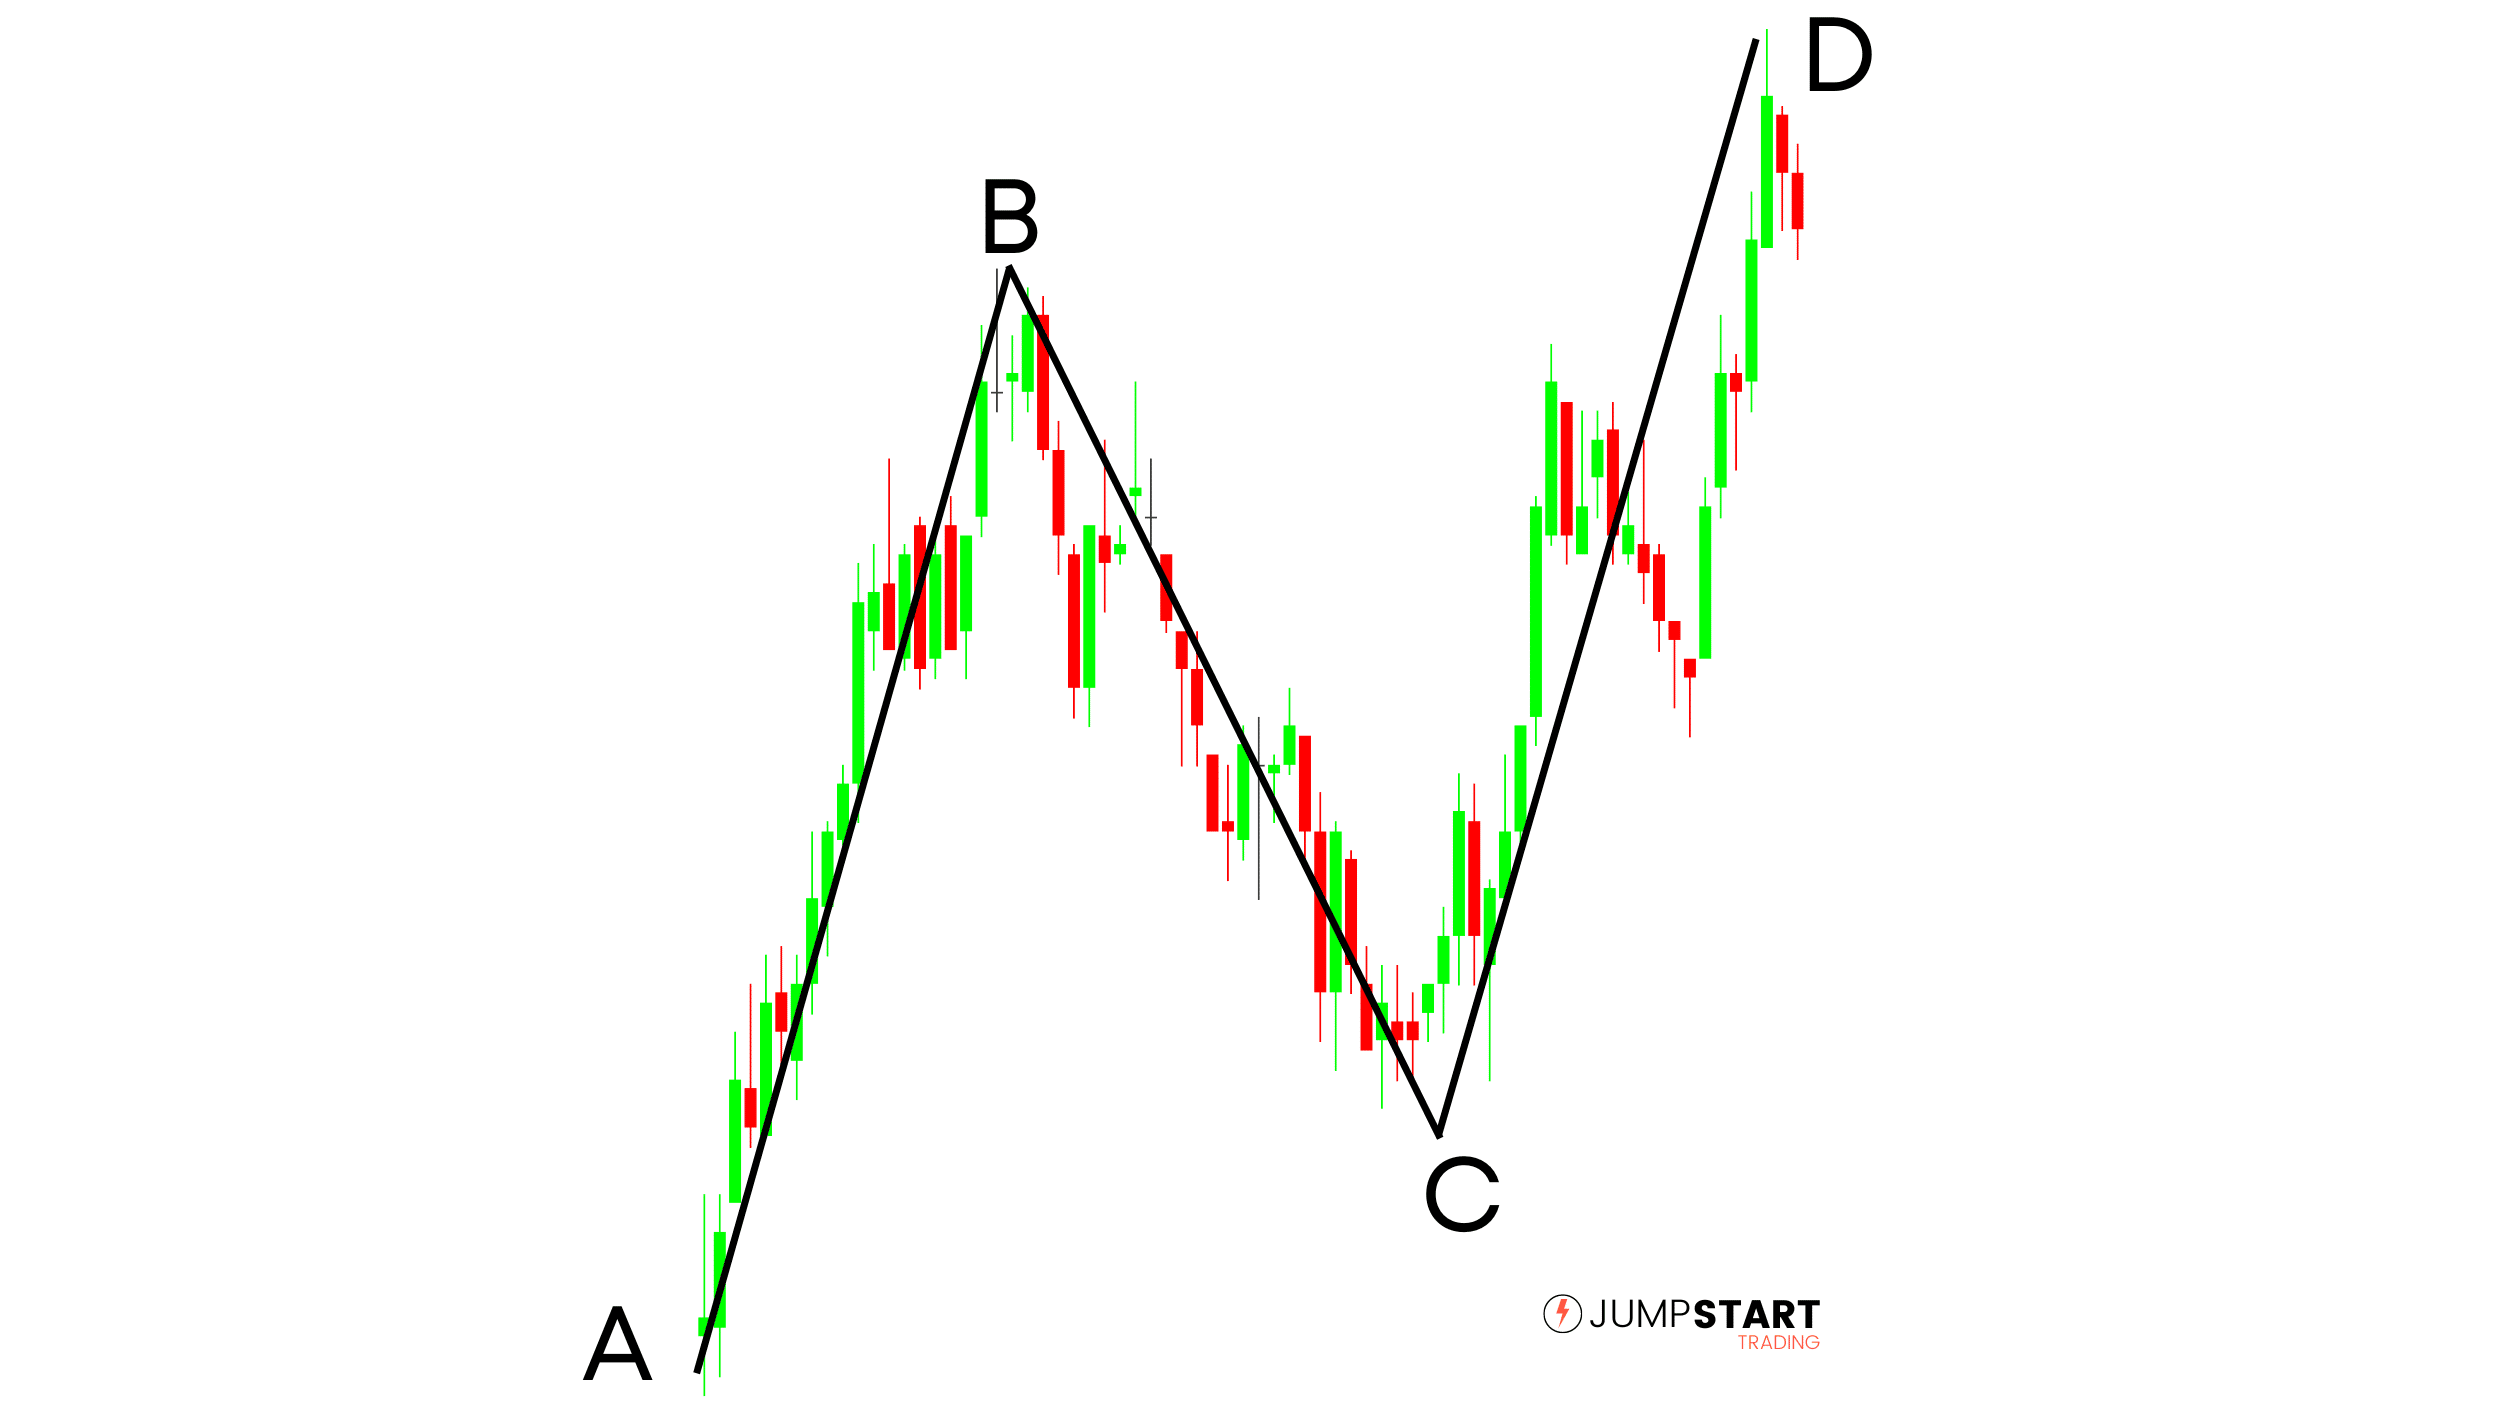 Price forming ABCD pattern